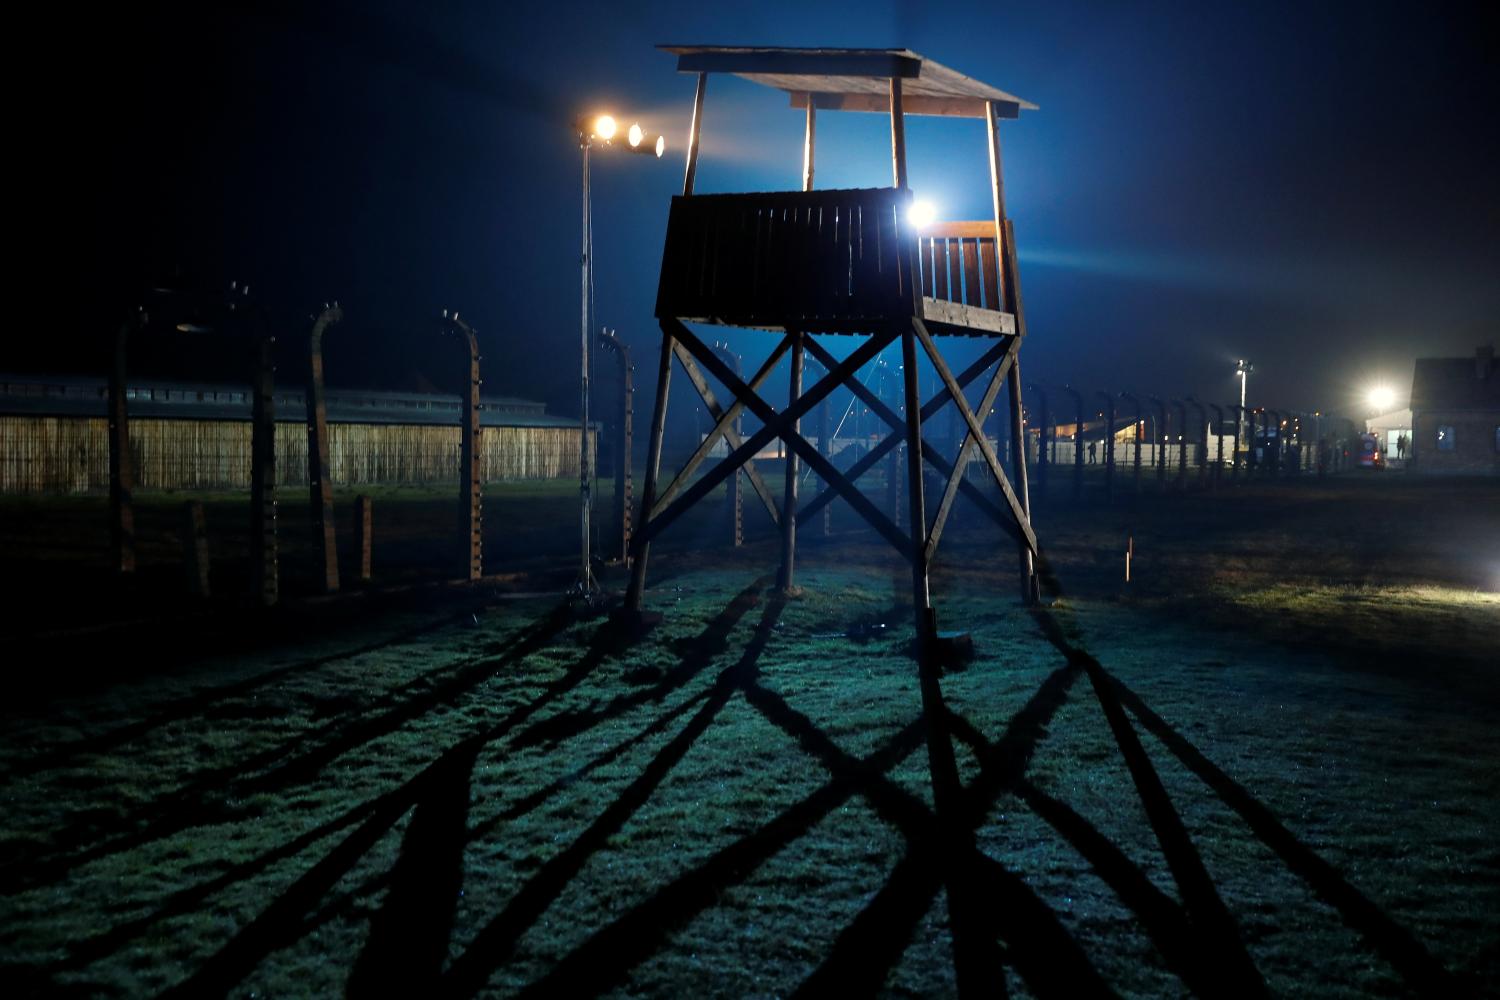 A sentry box is pictured on the site of the former Nazi German concentration and extermination camp Auschwitz II-Birkenau, during the ceremonies marking the 75th anniversary of the liberation of the camp and International Holocaust Victims Remembrance Day, in Brzezinka near Oswiecim, Poland, January 27, 2020. REUTERS/Kacper Pempel